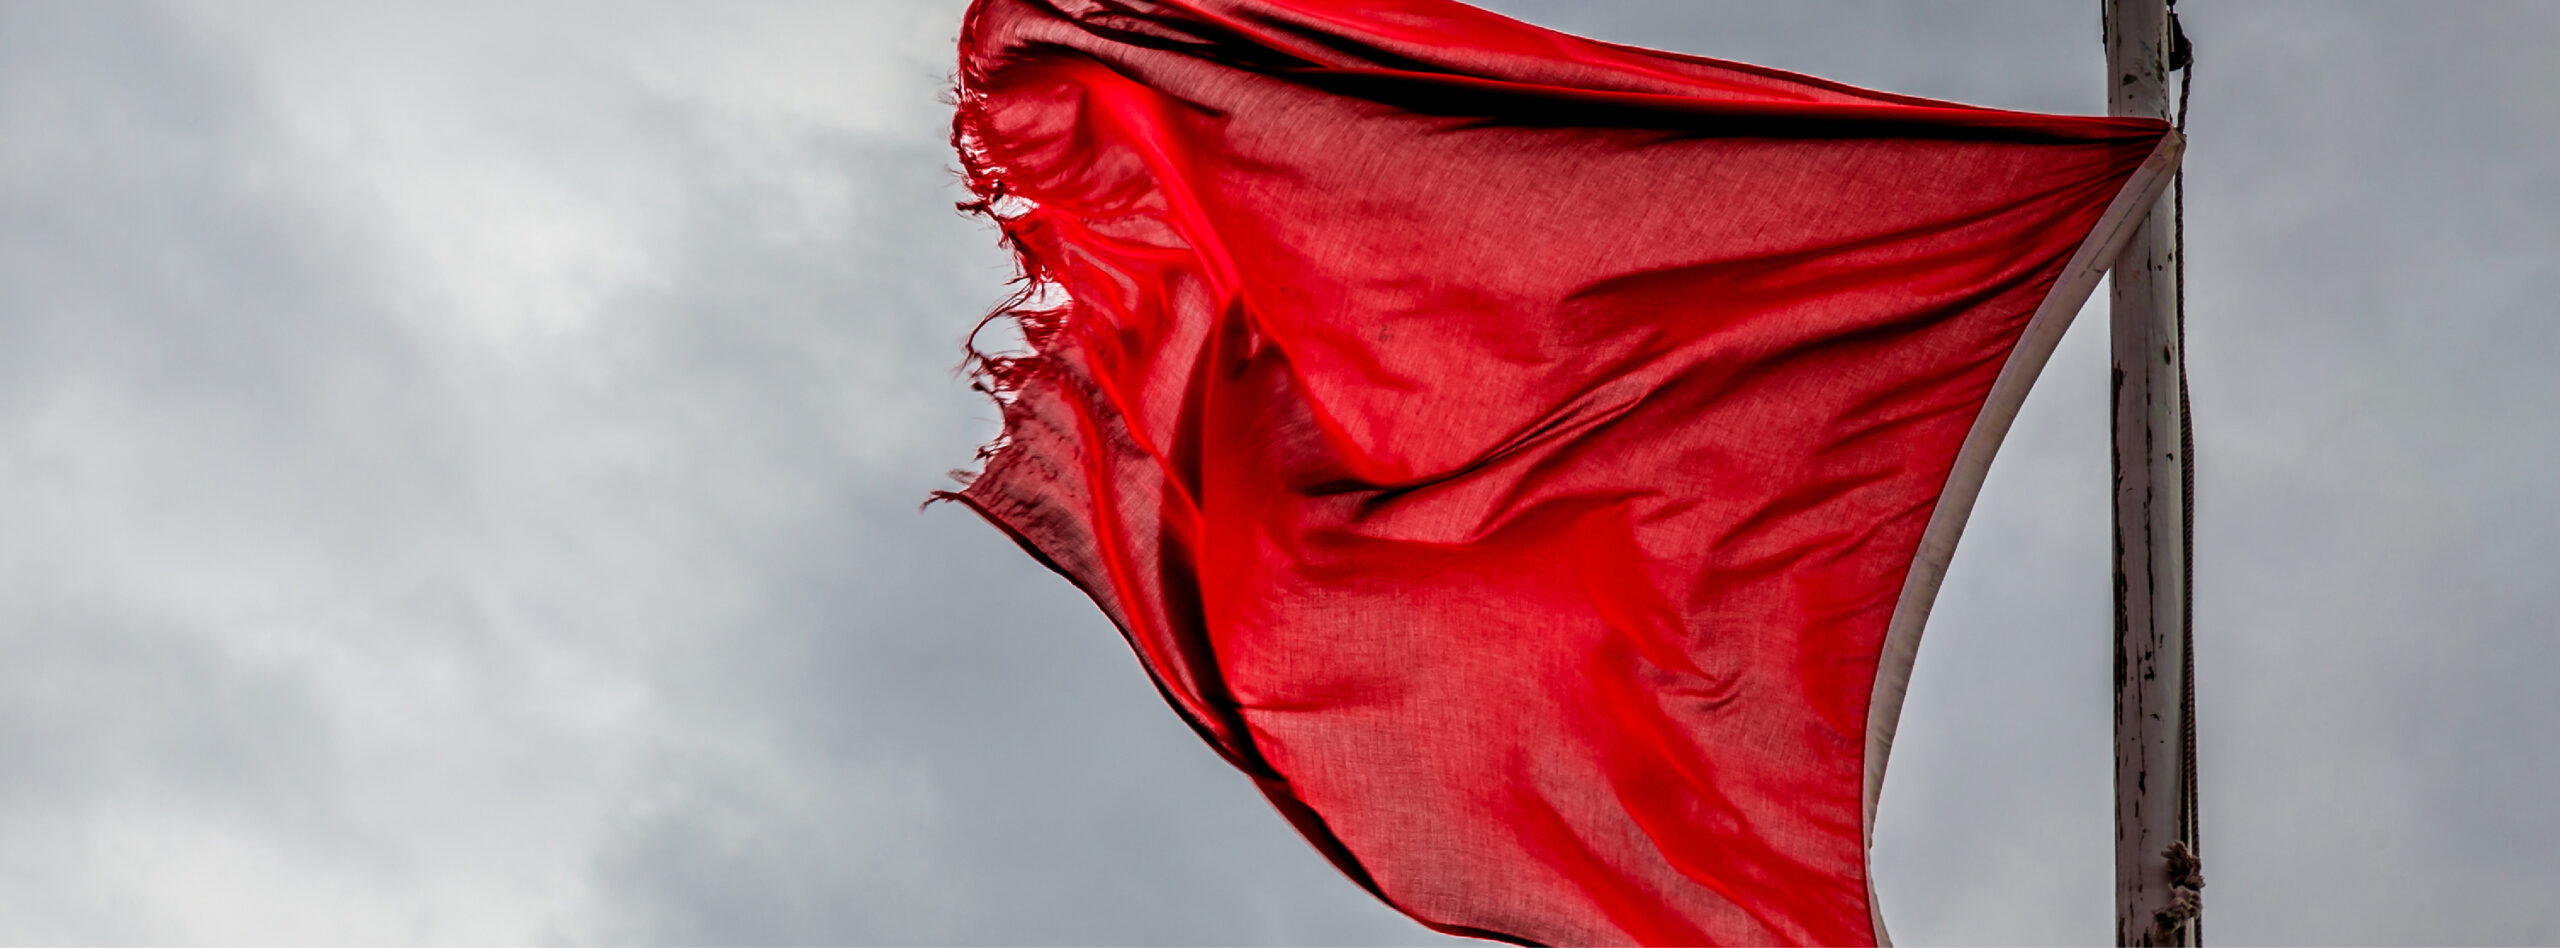 The “Red Flags” of an Inward Mindset